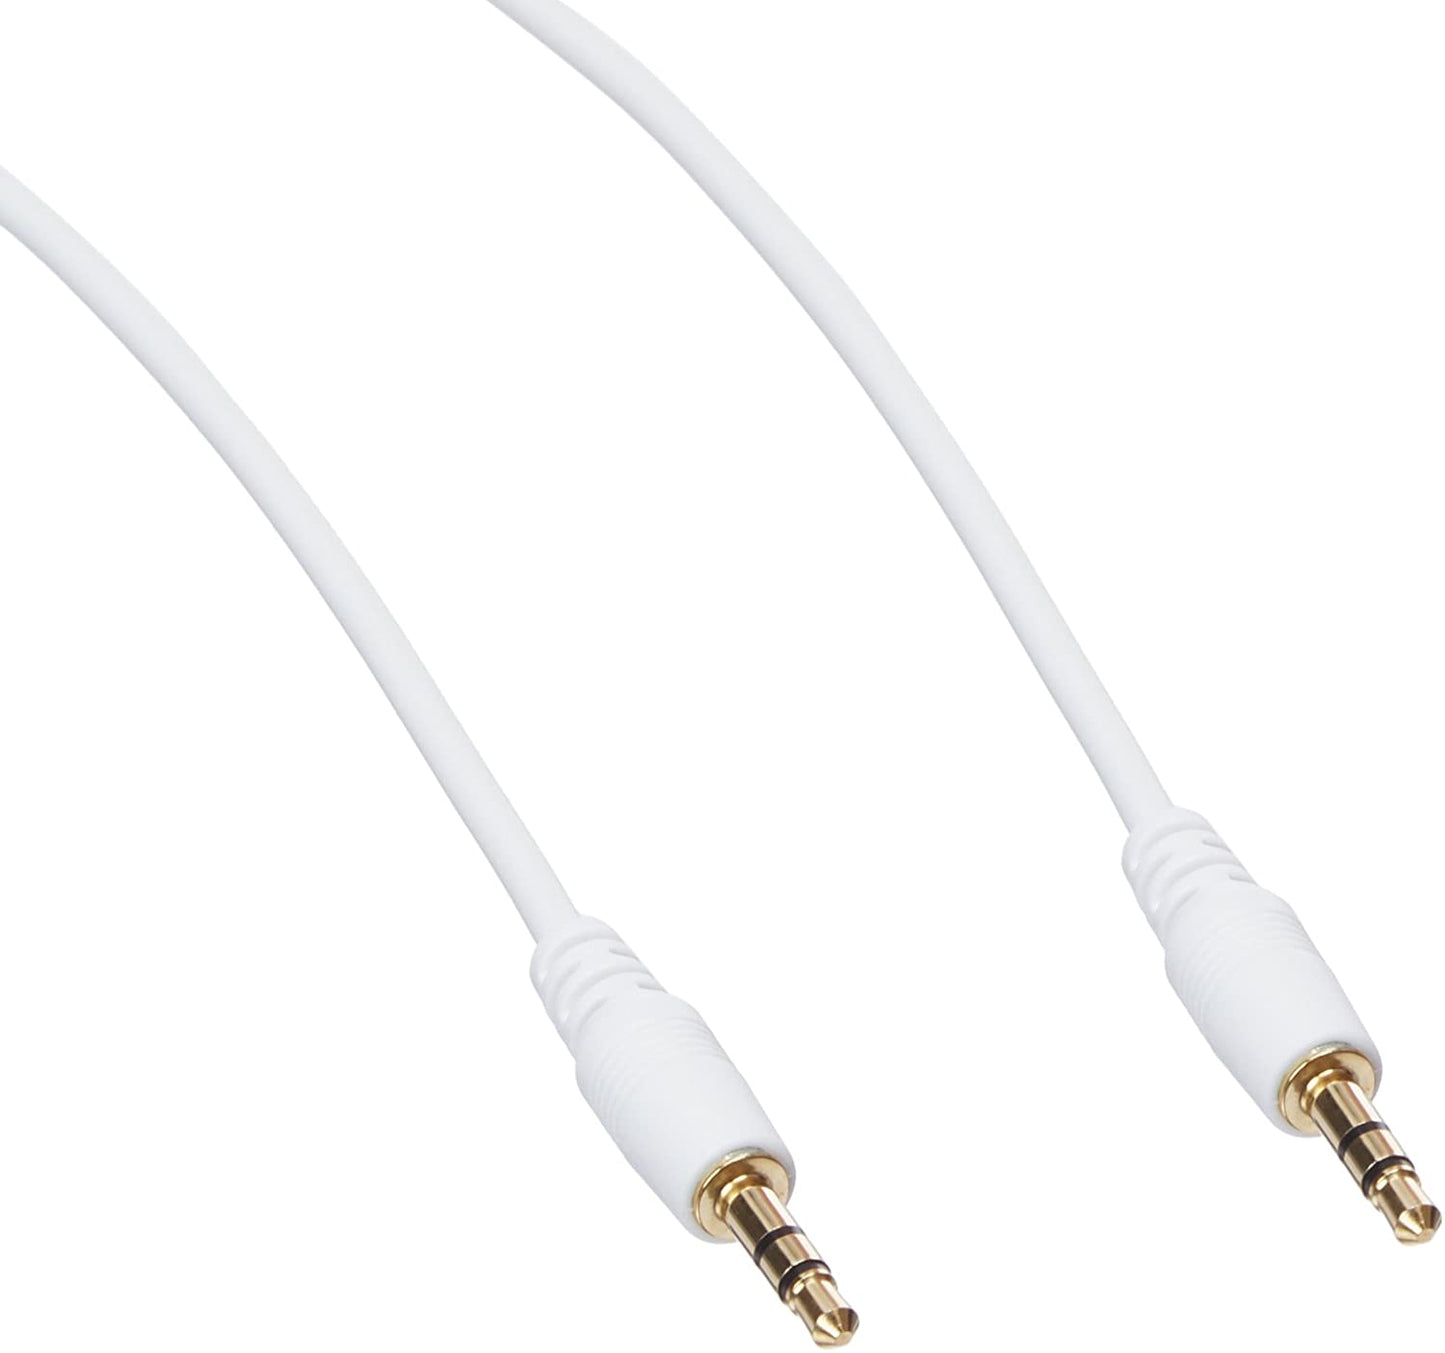 Stereo Audio Cable AUX Auxiliary Audio Plug 3.5MM Jack CAR, iPod iPhone IPAD New - Sonitek